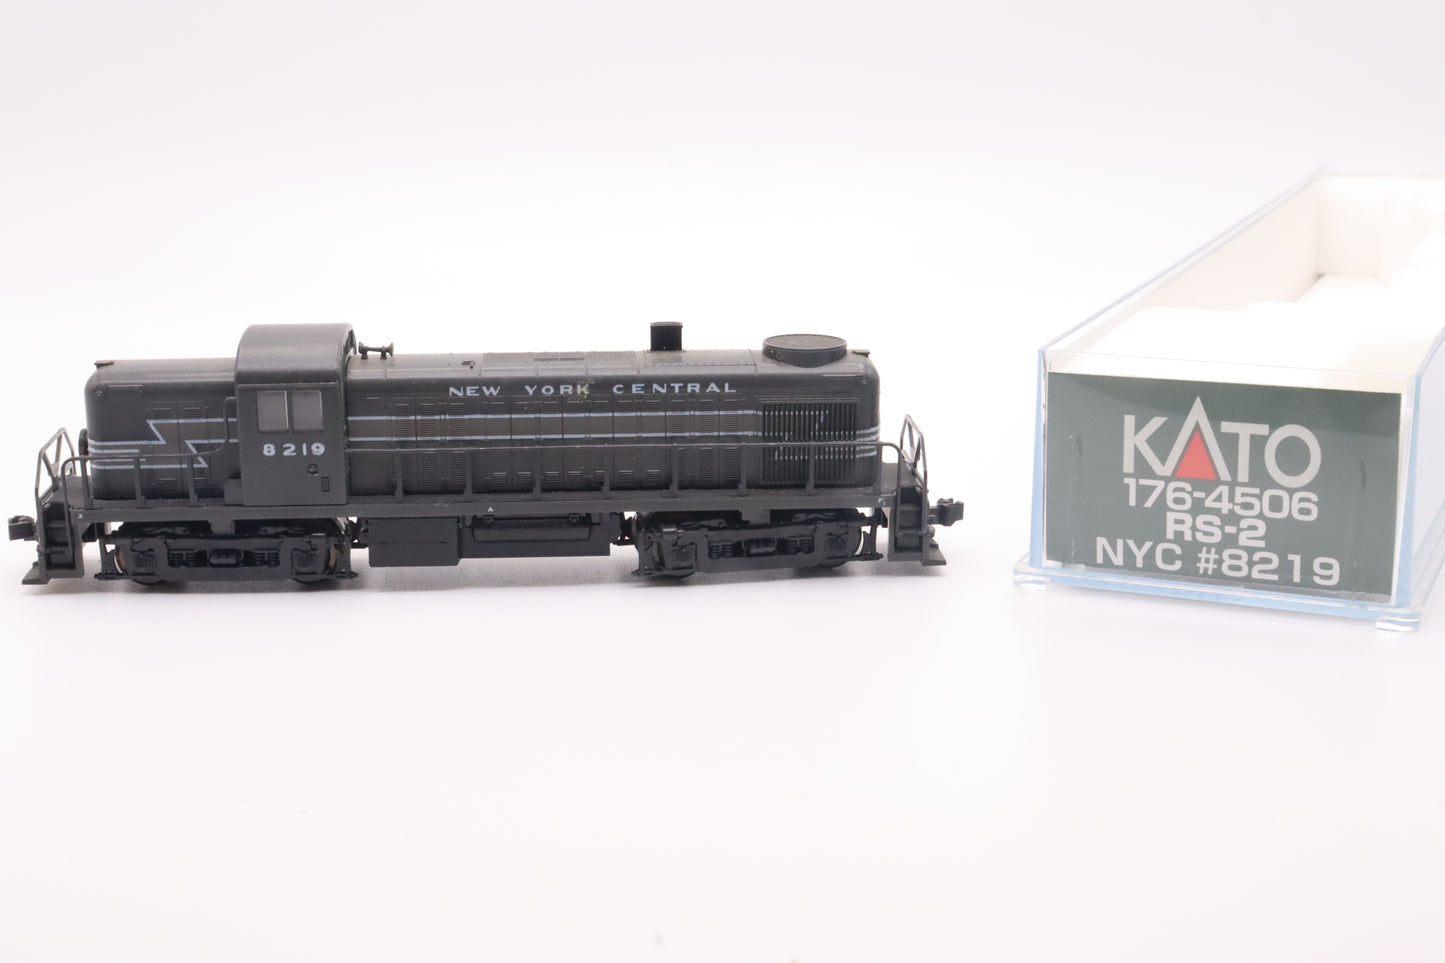 KAT-176-4506 - RS-2 Locomotive - New York Central - NYC-8219